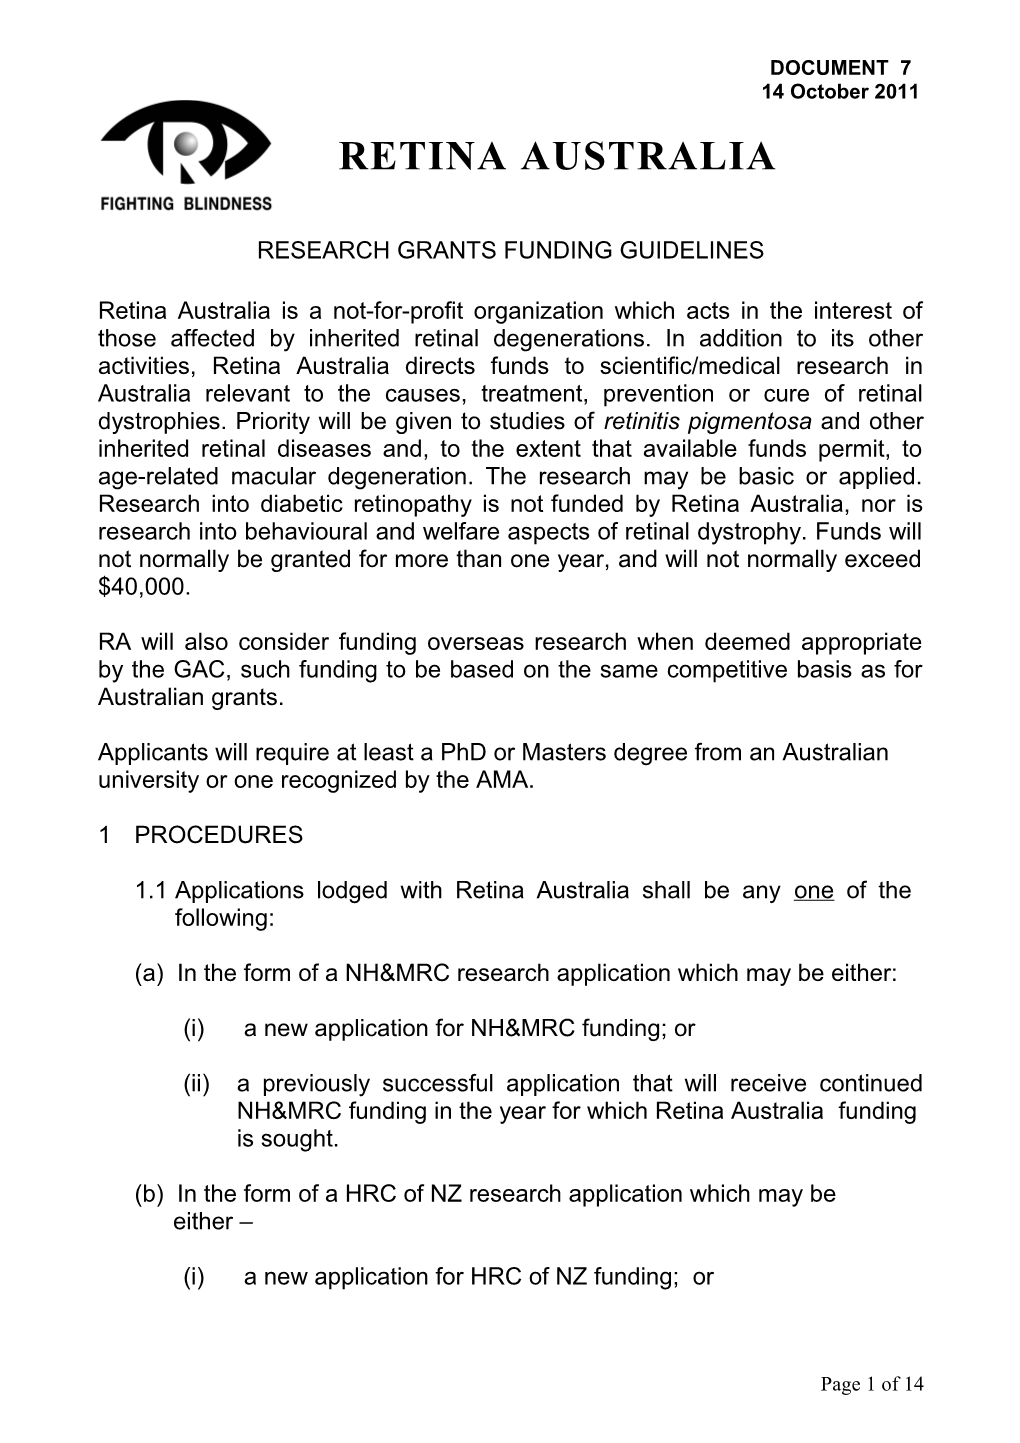 Research Grants Funding Guidelines